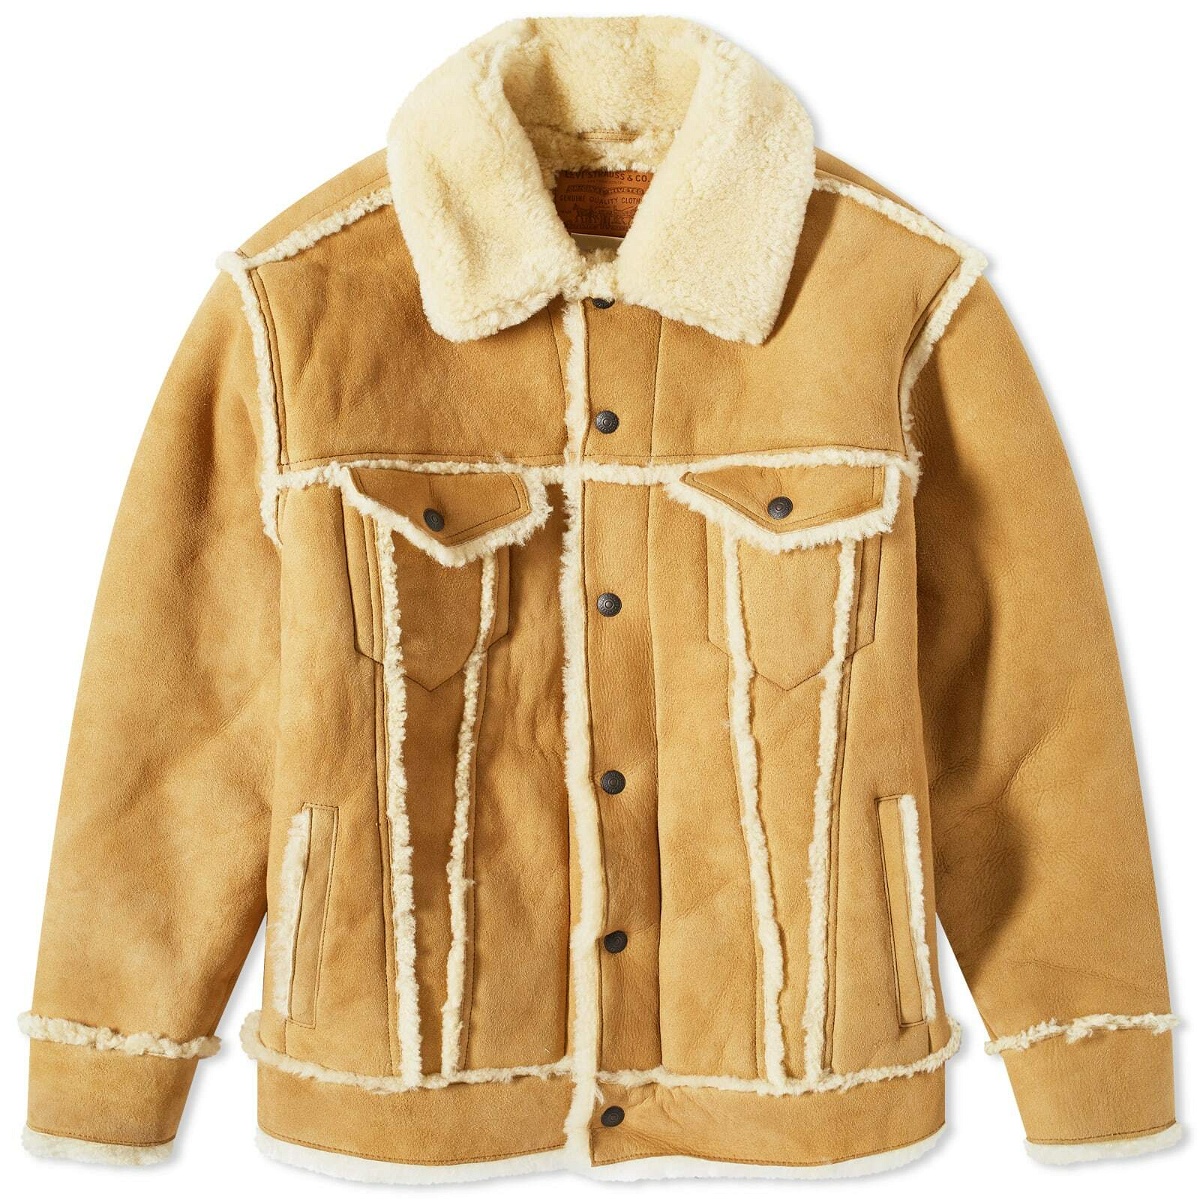 Levi’s Collections Men's Levis Vintage Clothing Shearling Trucker ...